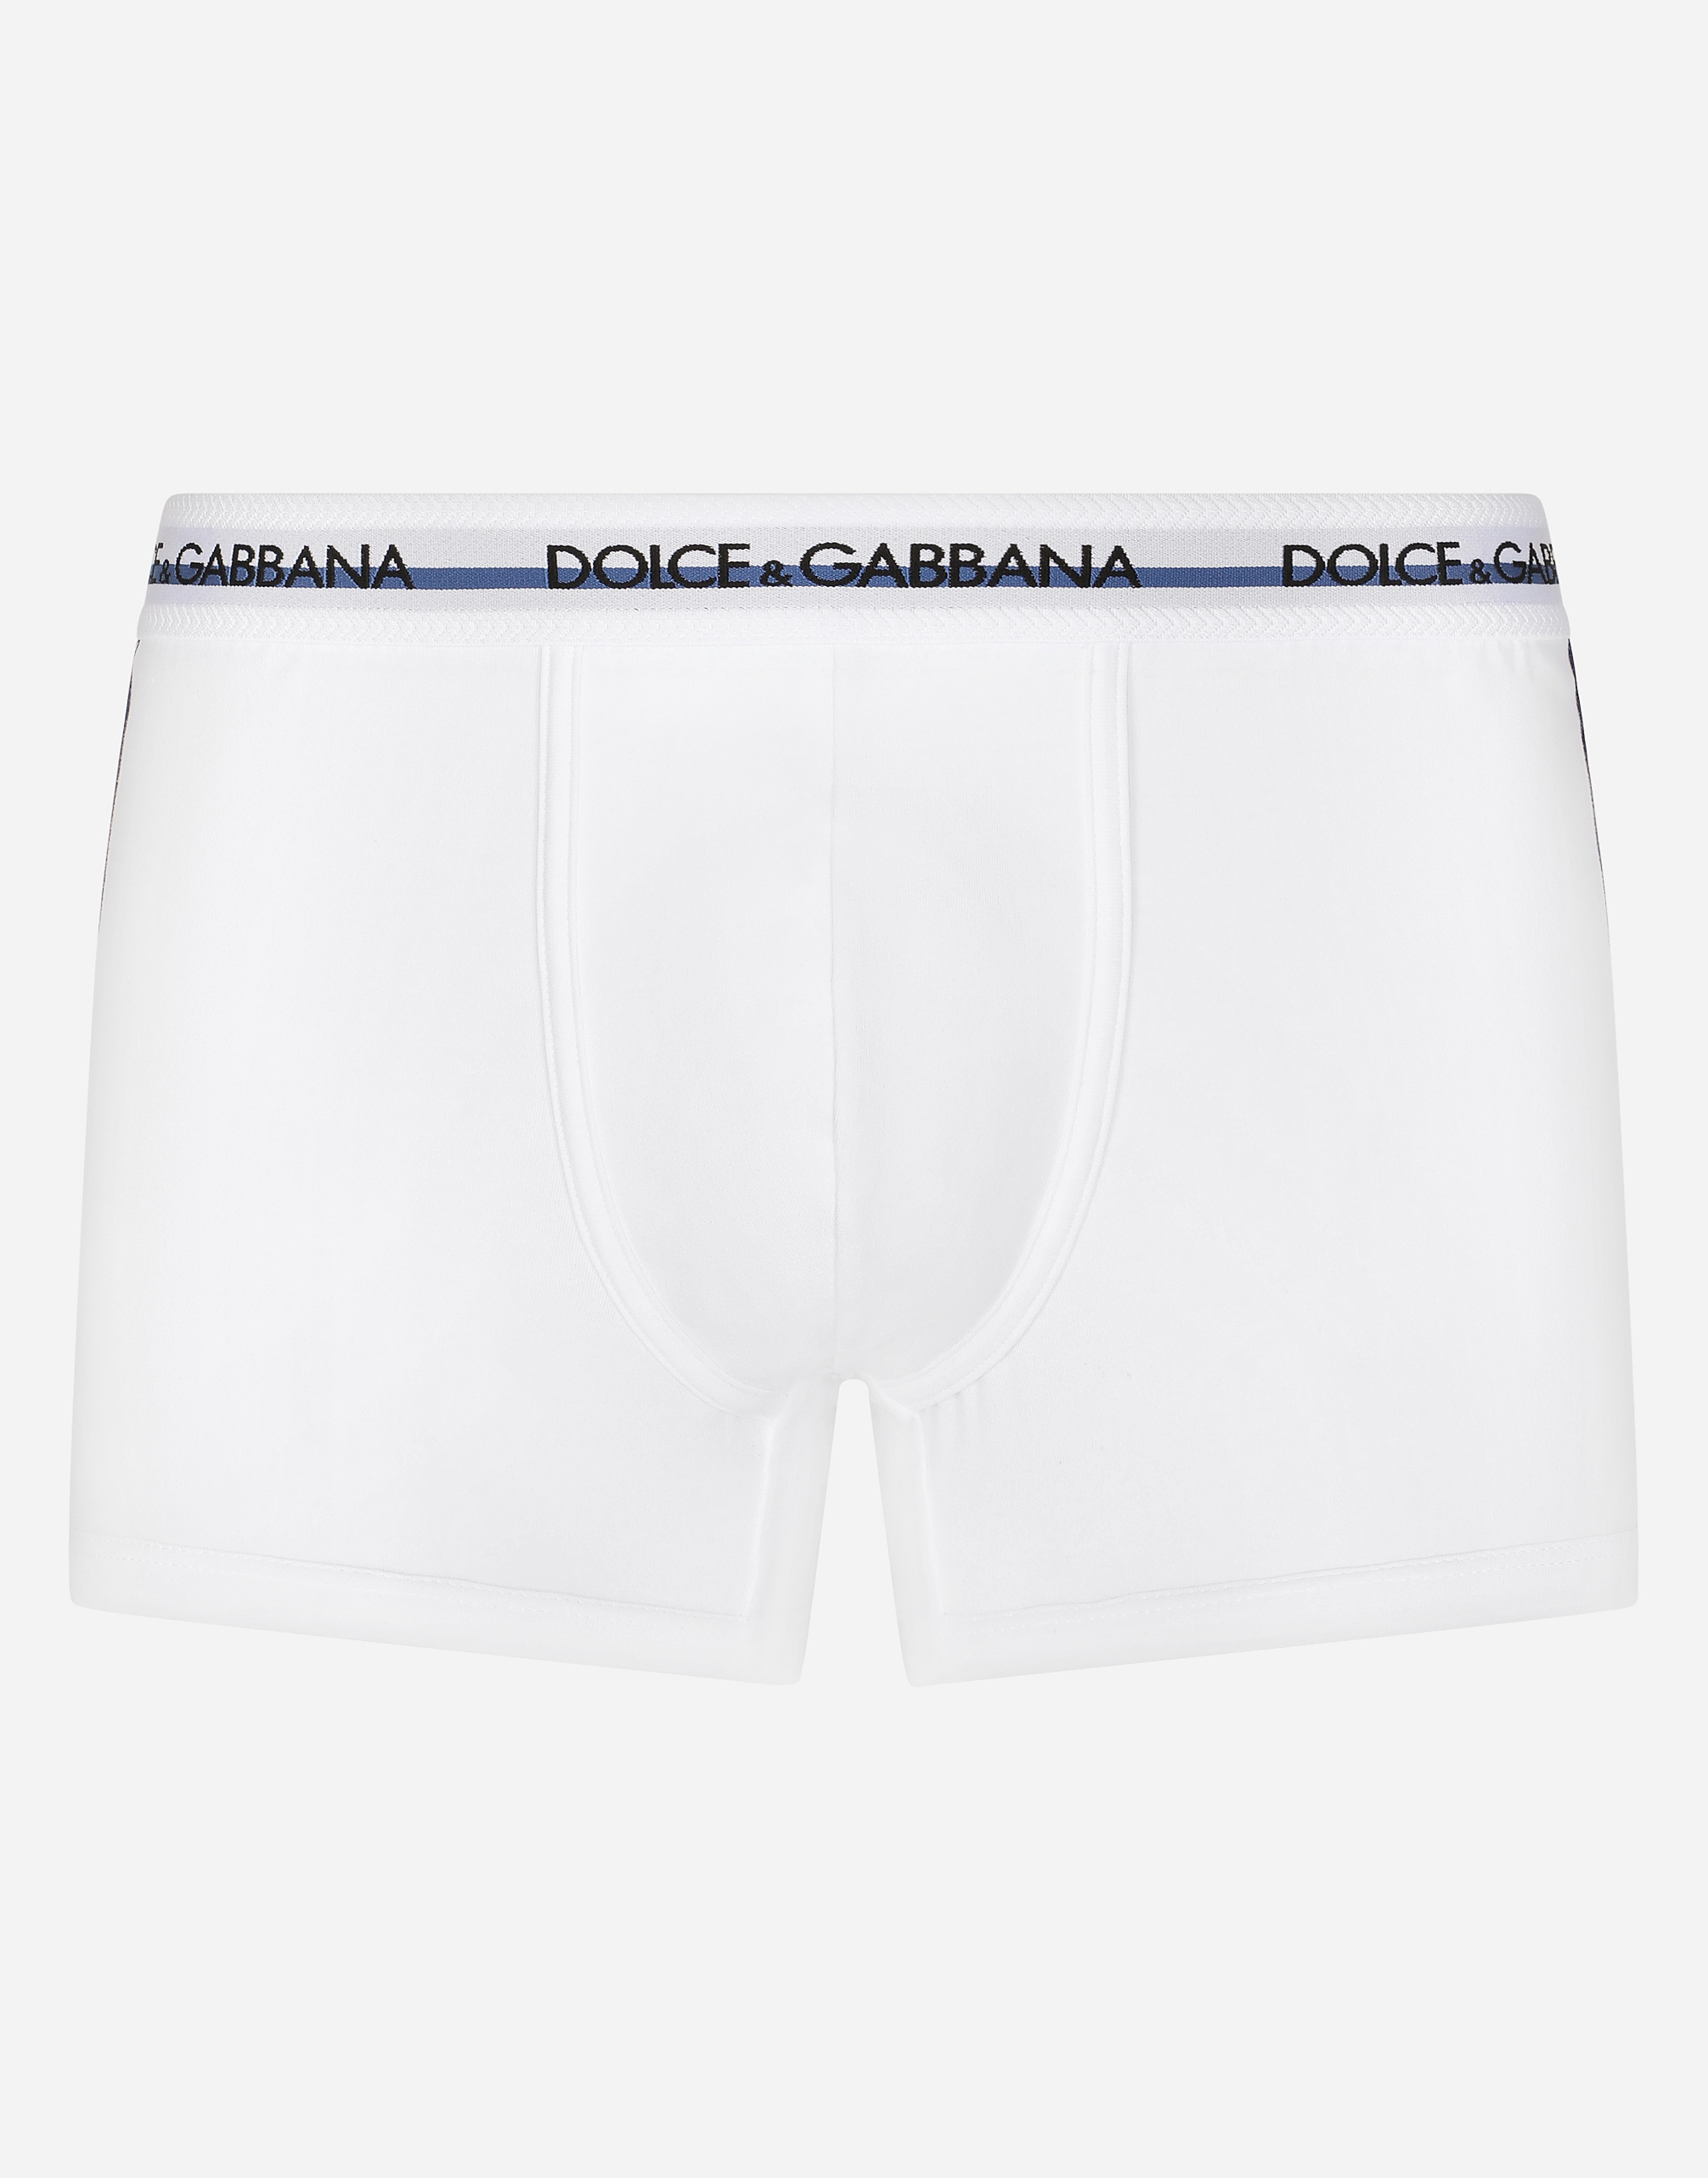 Two-way stretch jersey boxers with DG logo in White